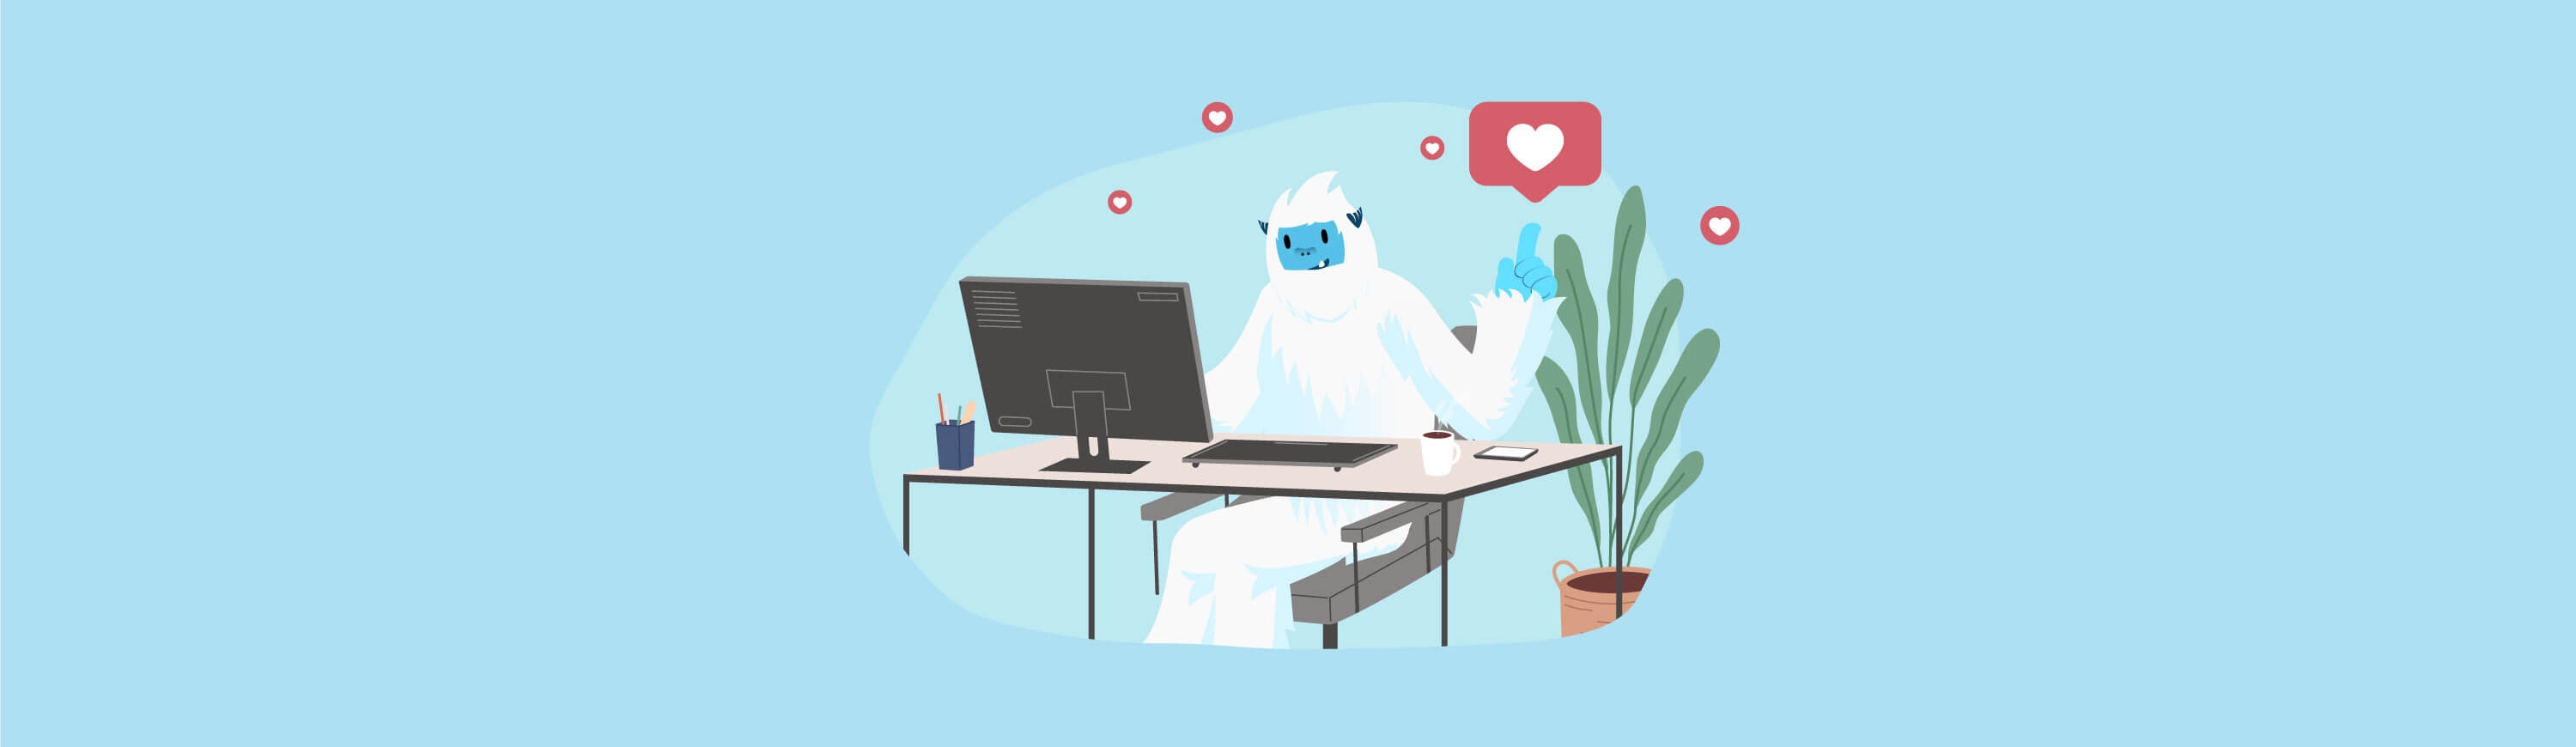 Illustration of Carl the yeti sitting happily at a desk with a computer.